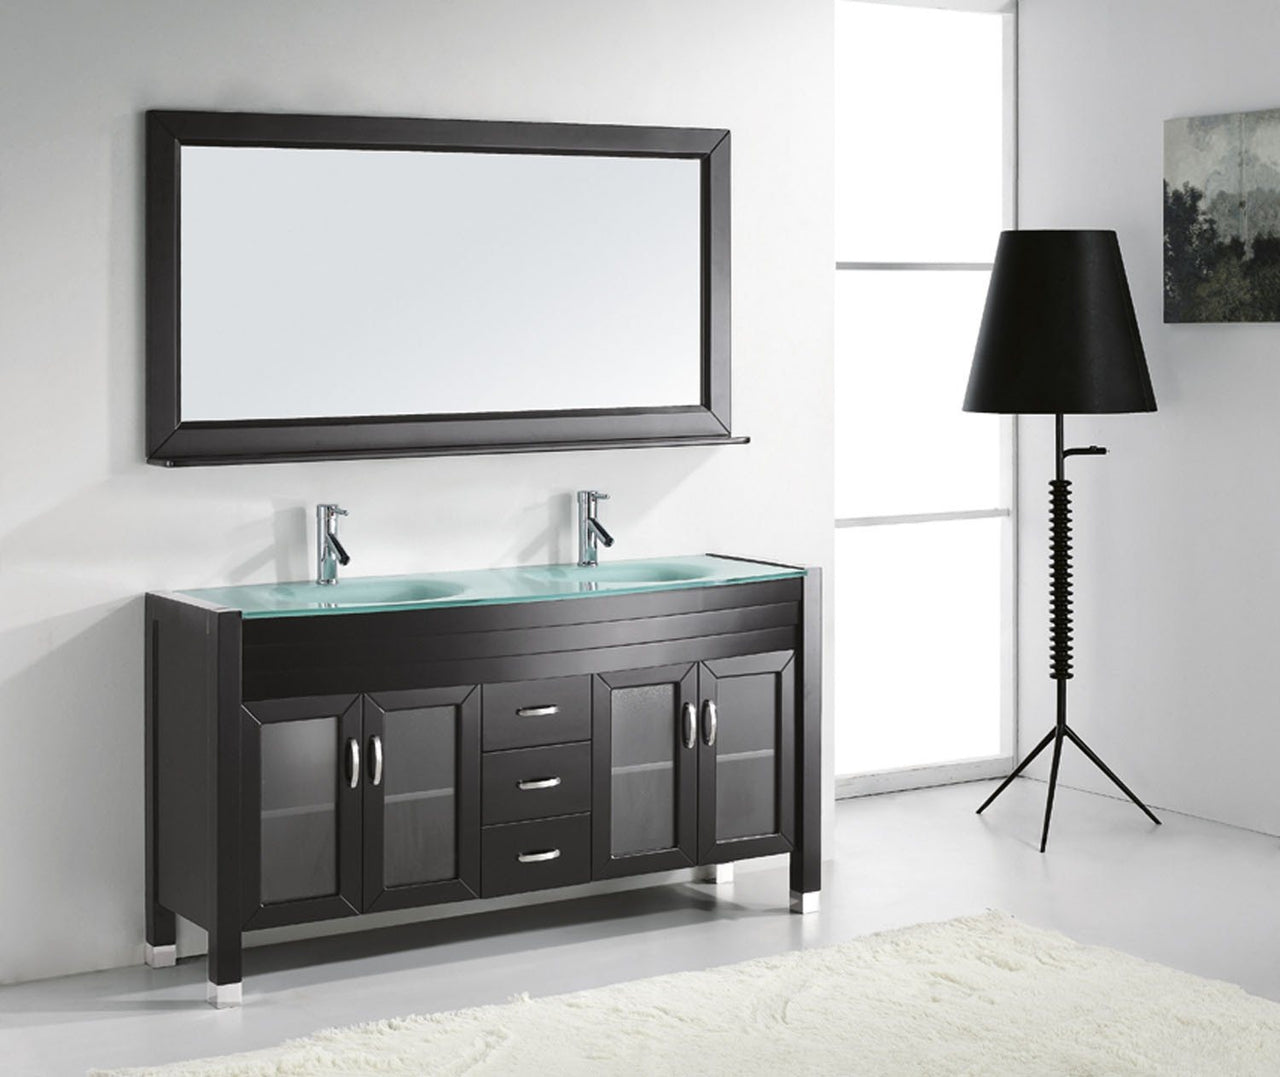 Virtu USA Ava 63" Double Round Sink Espresso Top Vanity in Espresso with Polished Chrome Faucet and Mirror Vanity Virtu USA 